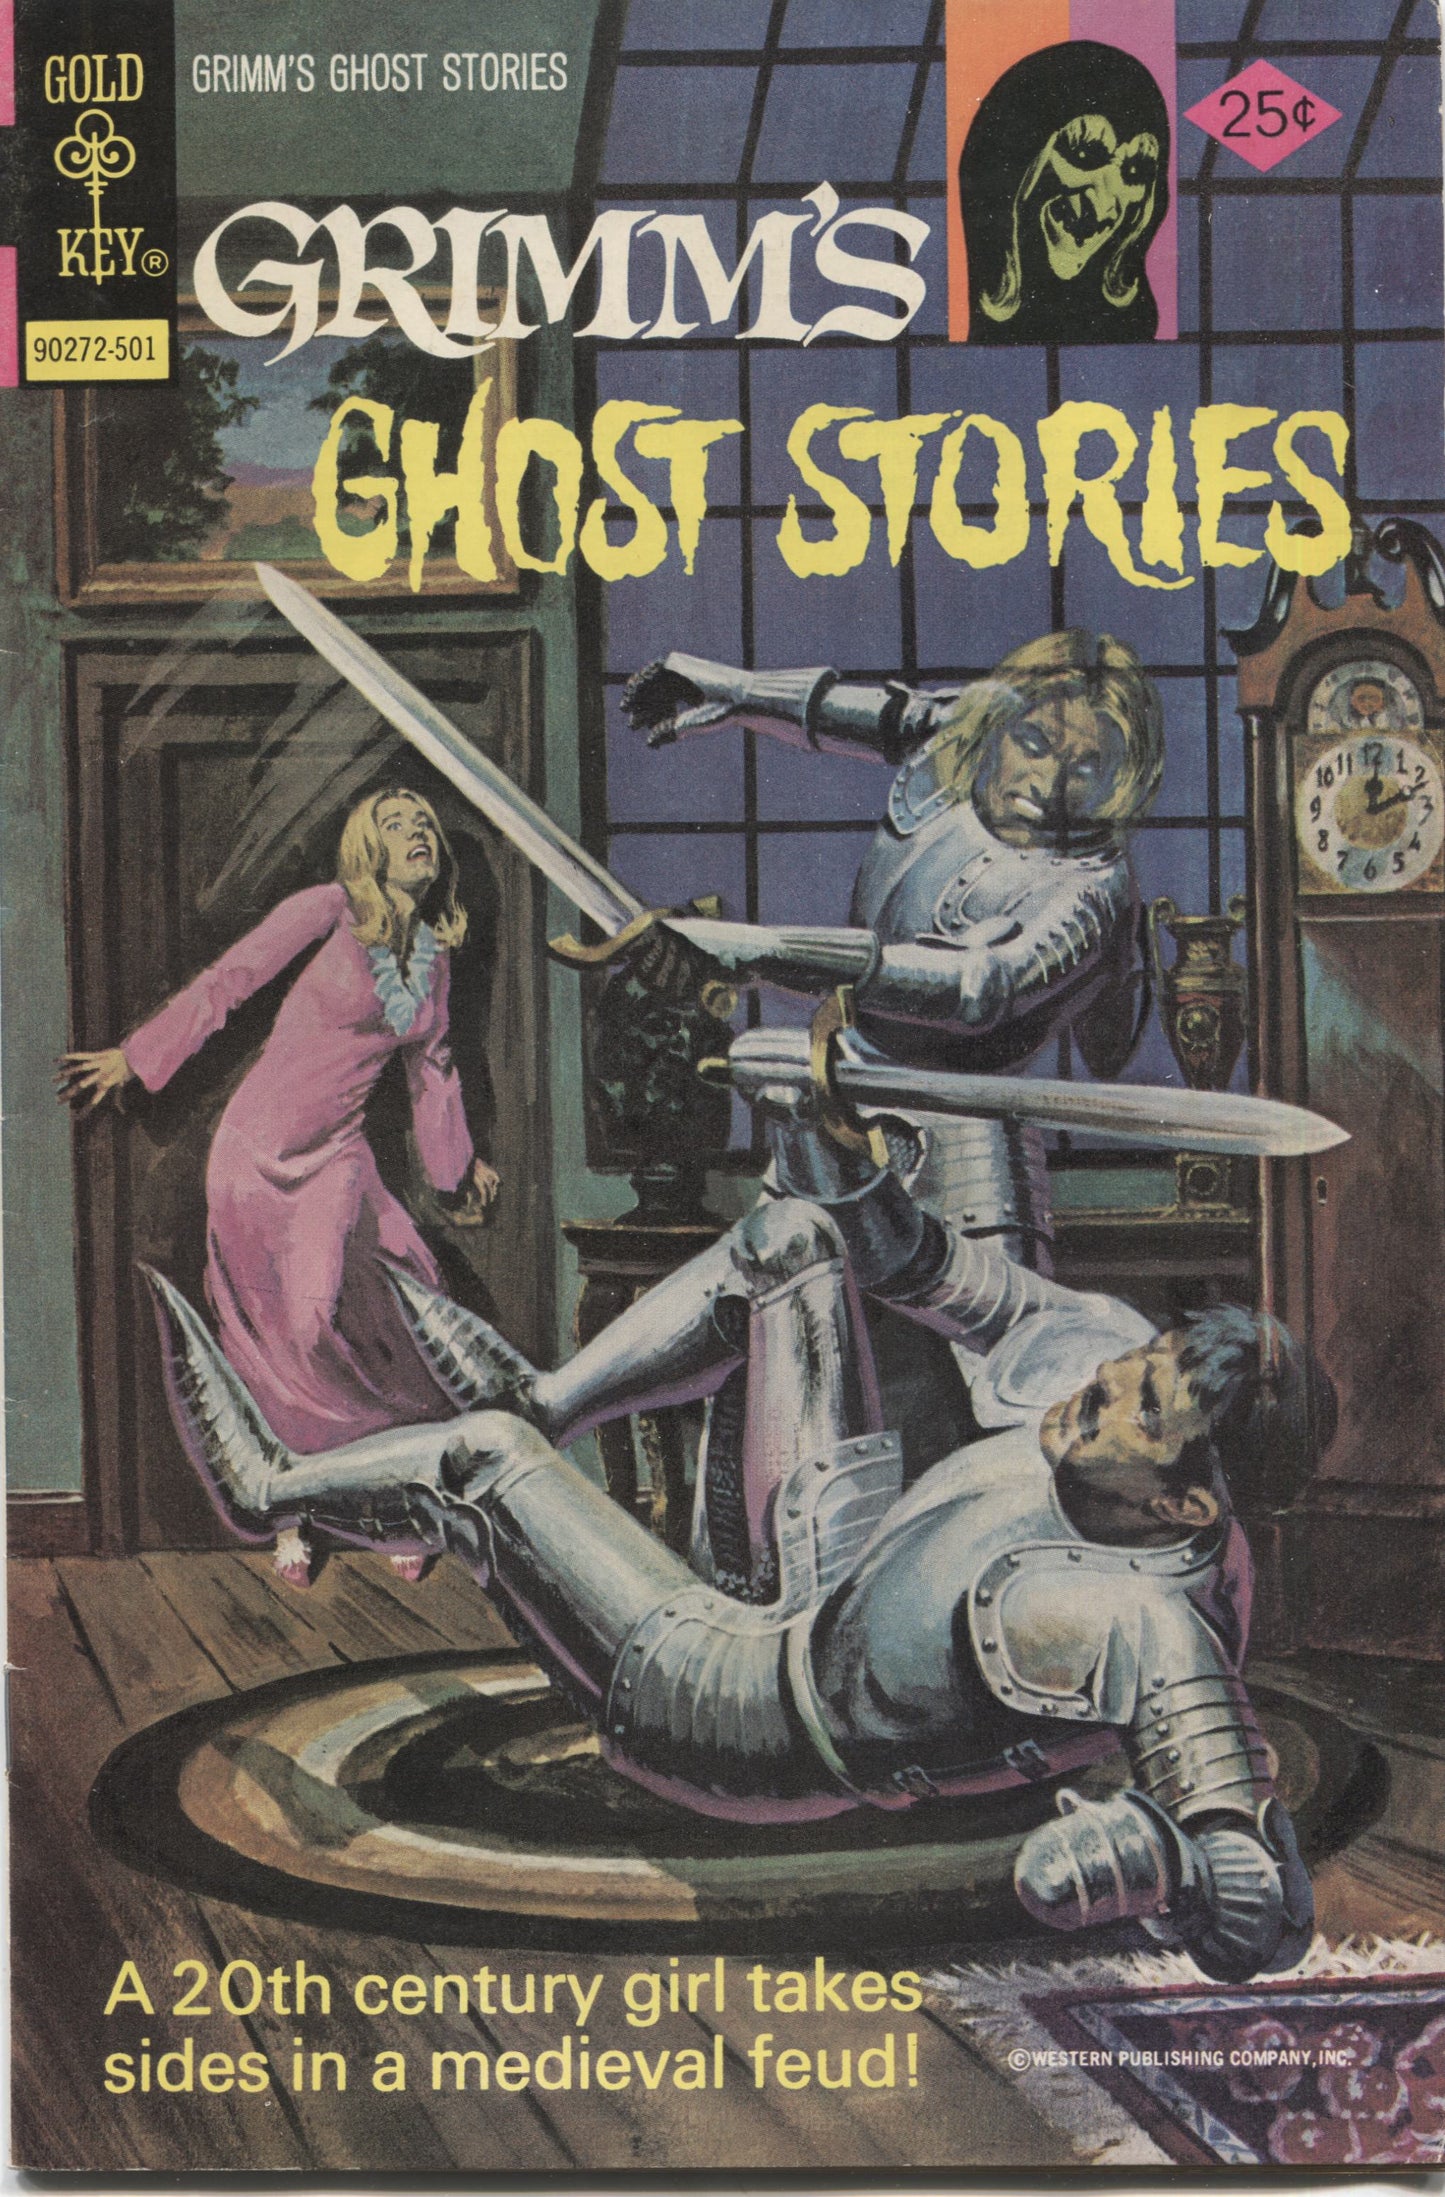 Grimm's Ghost Stories No. 21, Gold Key Comics, January 1975